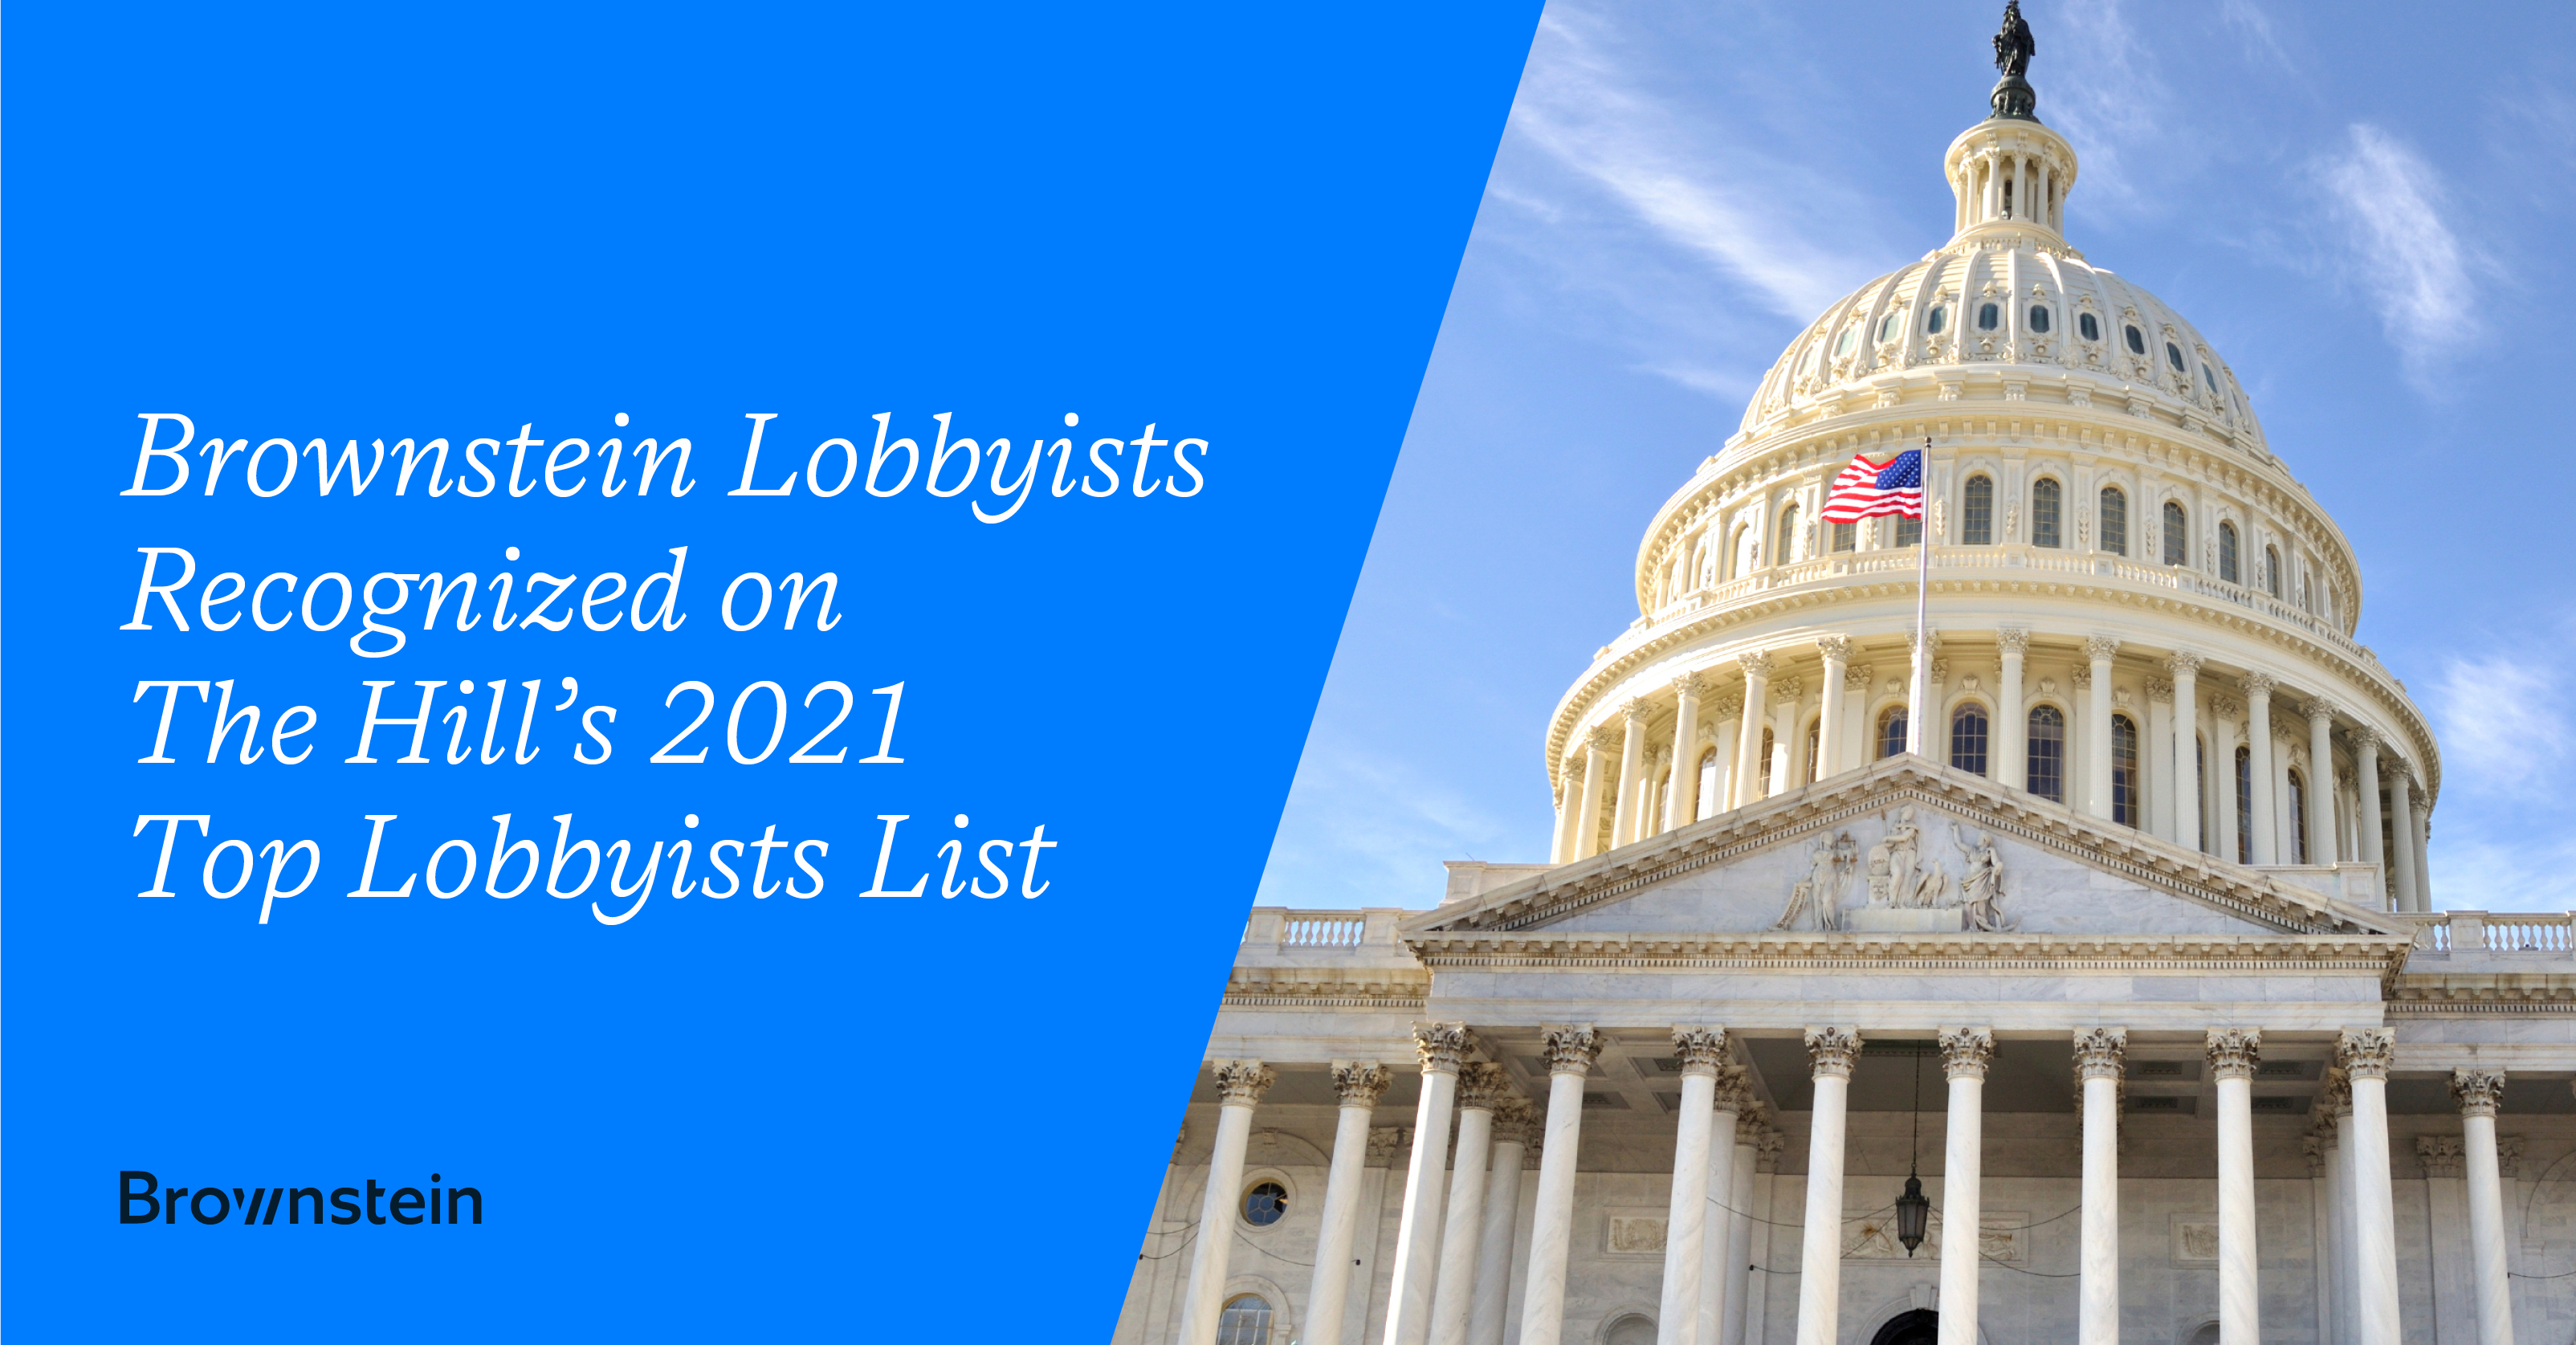 Brownstein Lobbyists Recognized The 2021 Top Lobbyists List